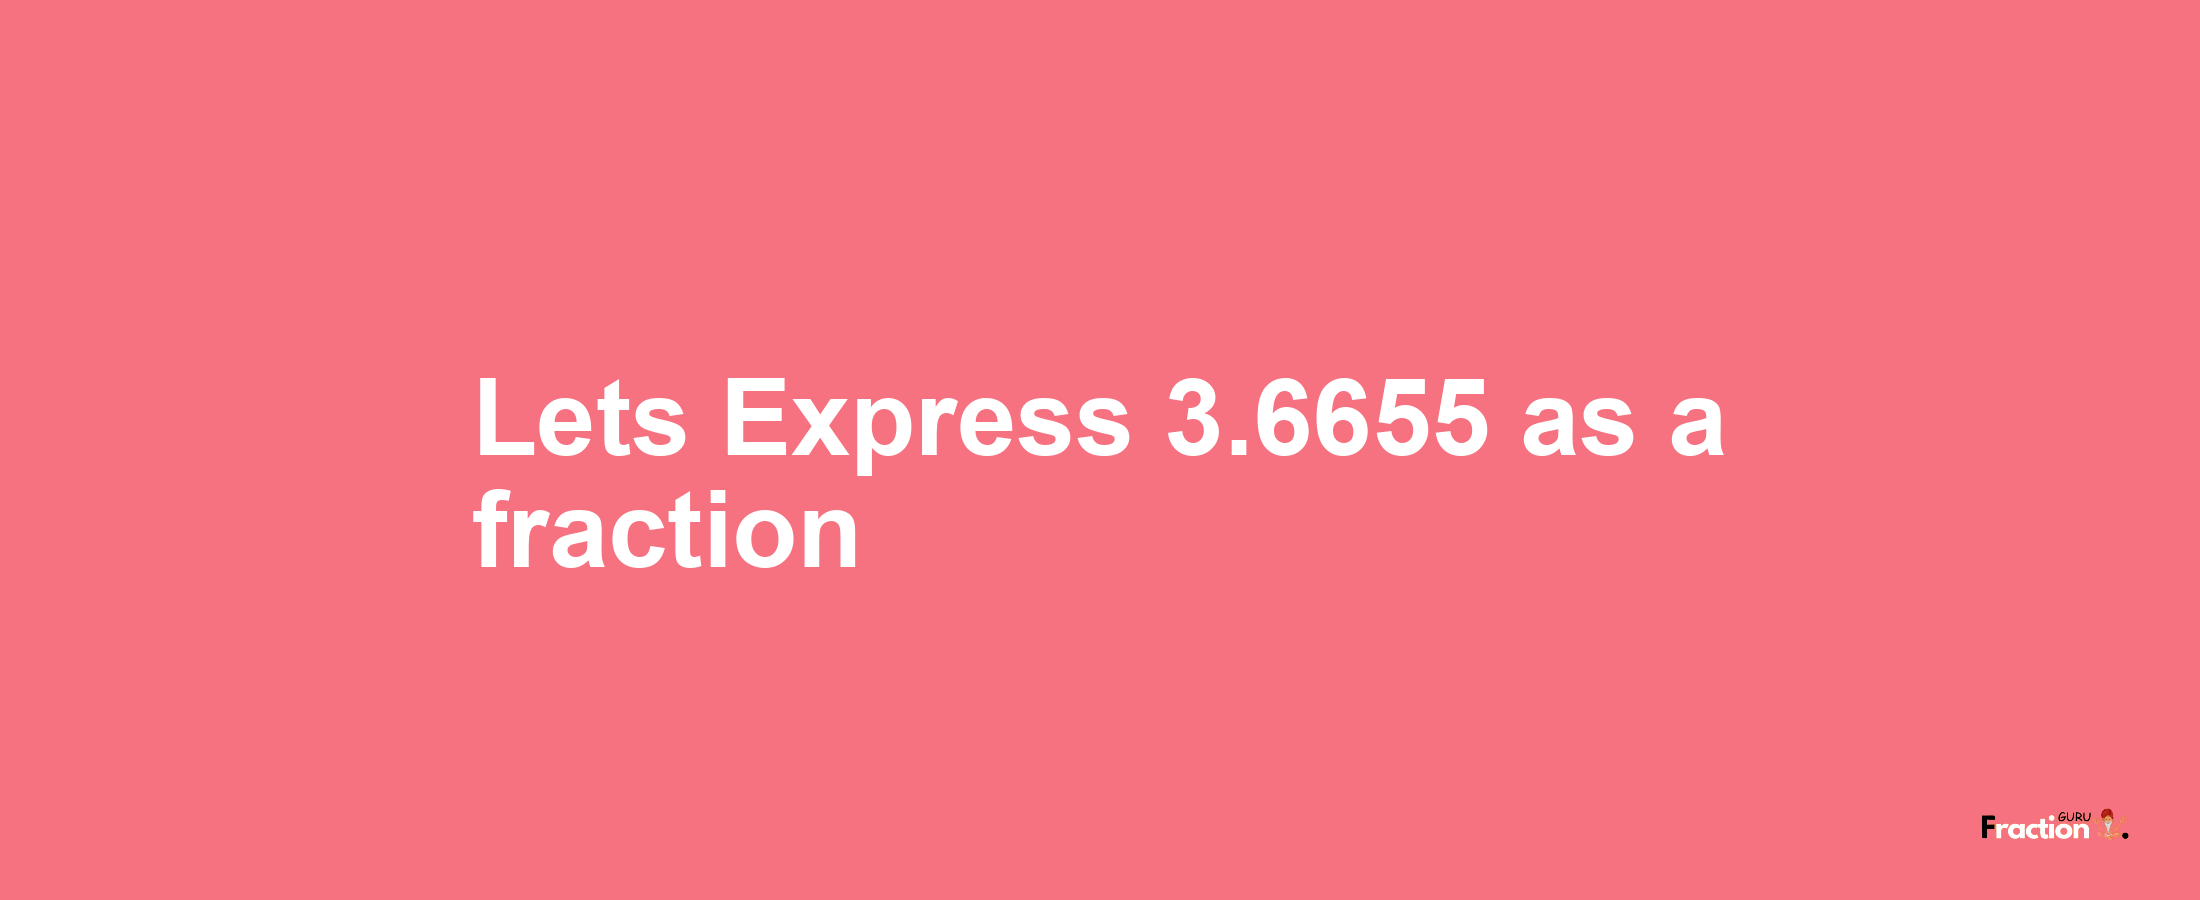 Lets Express 3.6655 as afraction